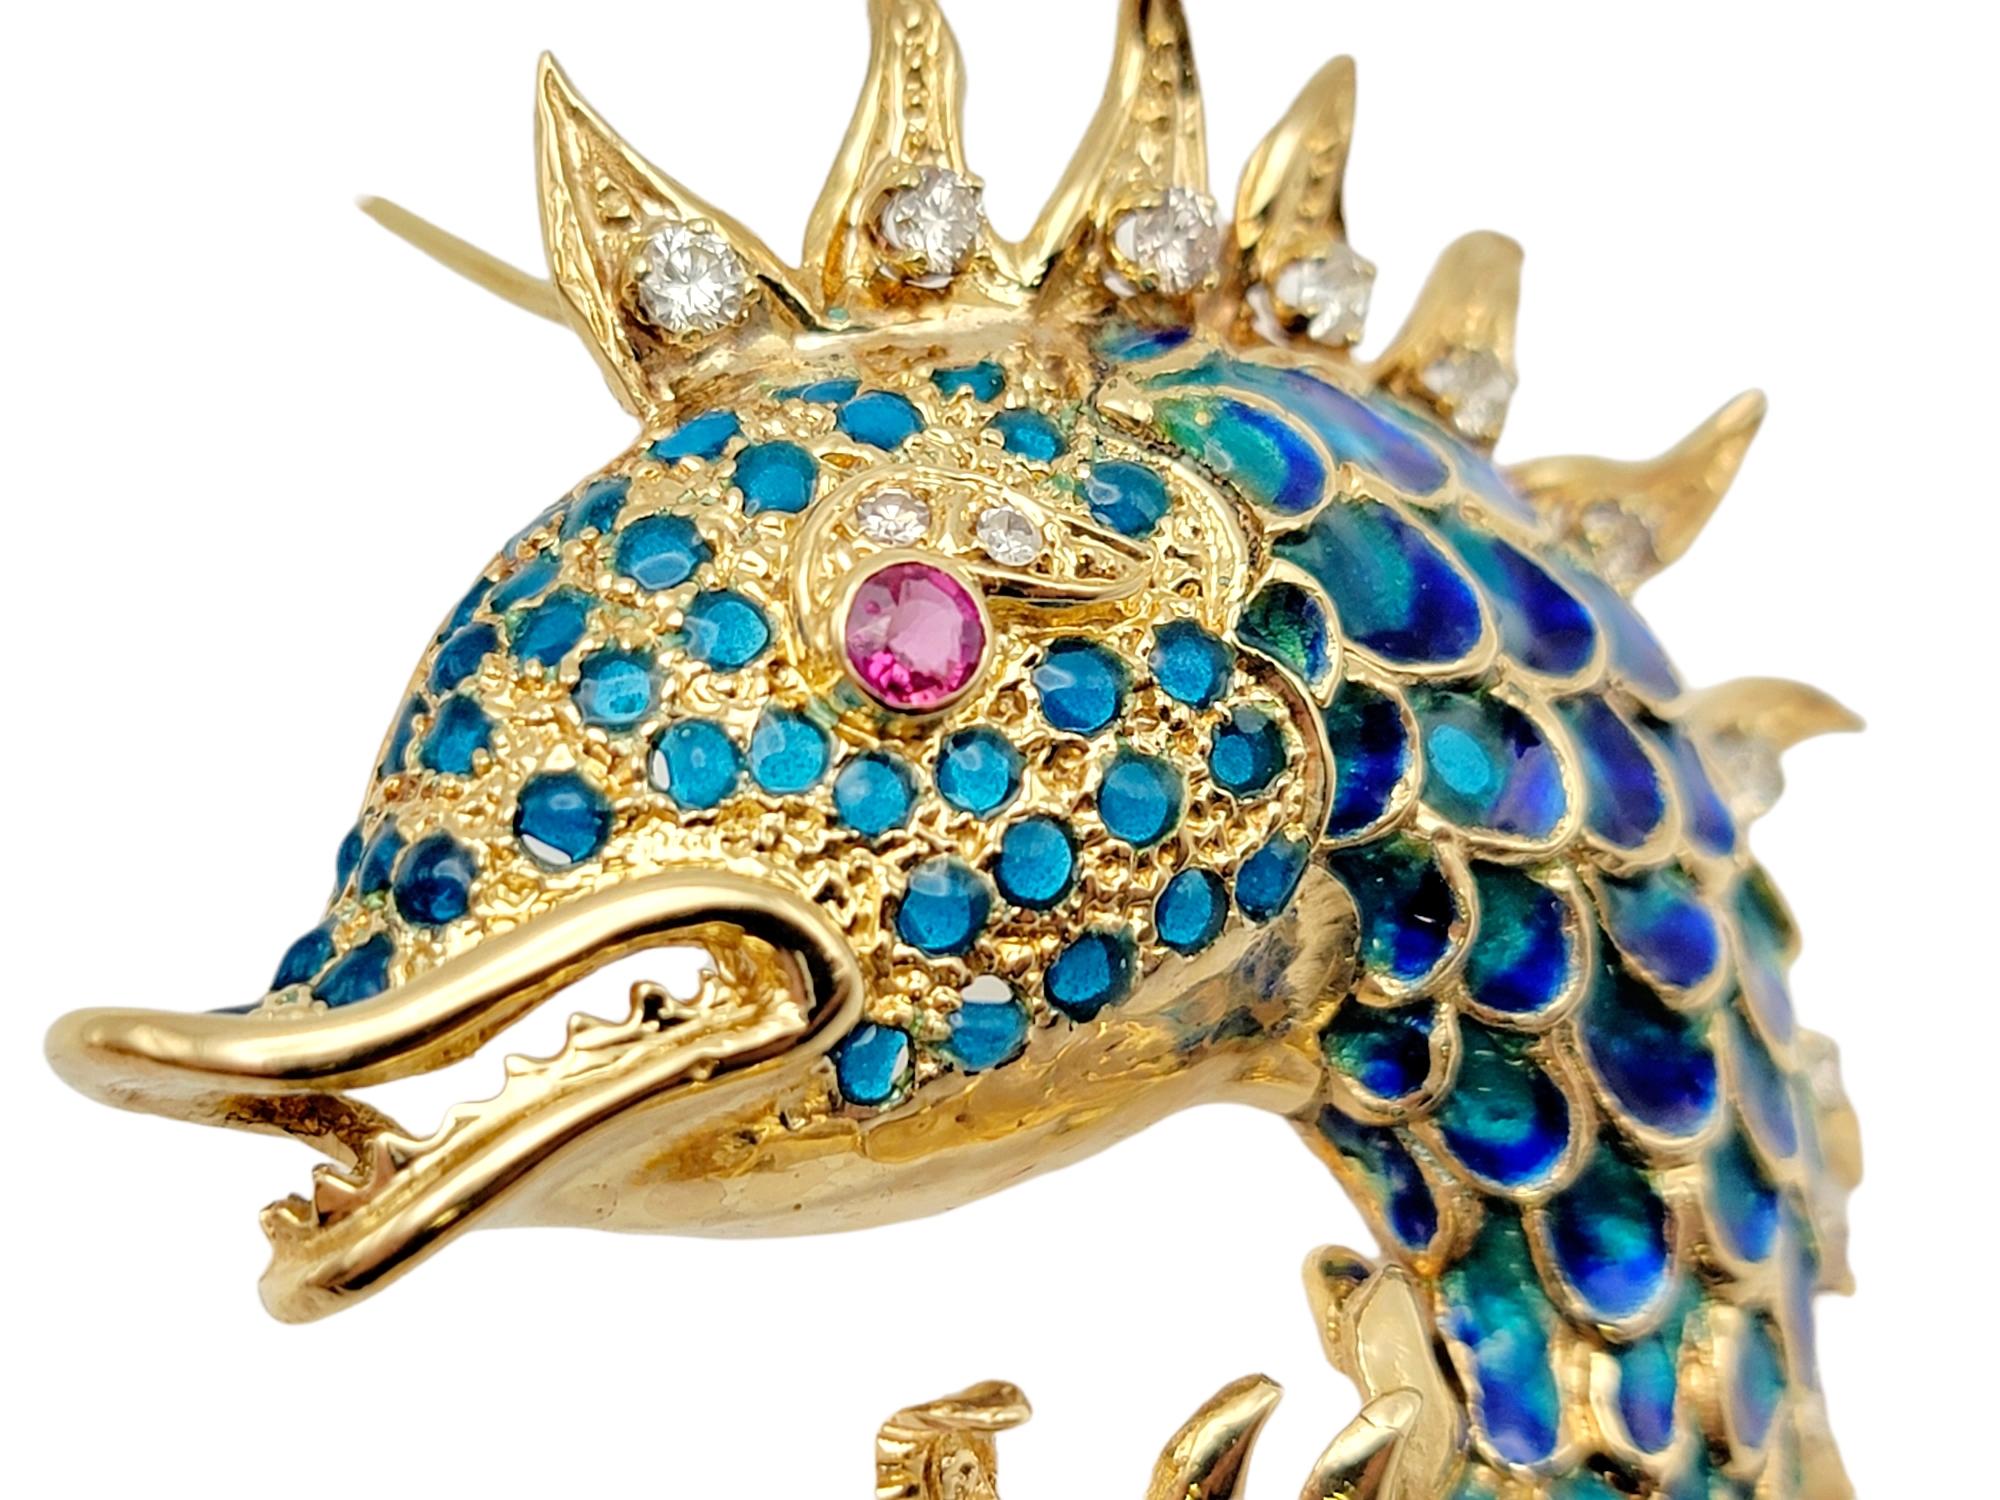 This magnificent three dimensional scaled fish brooch will become a signature piece! From the rounded scaled fish body to the flowing fins and details like eyebrows and teeth, this brooch has every exquisite detail. 

This piece features .85 carats